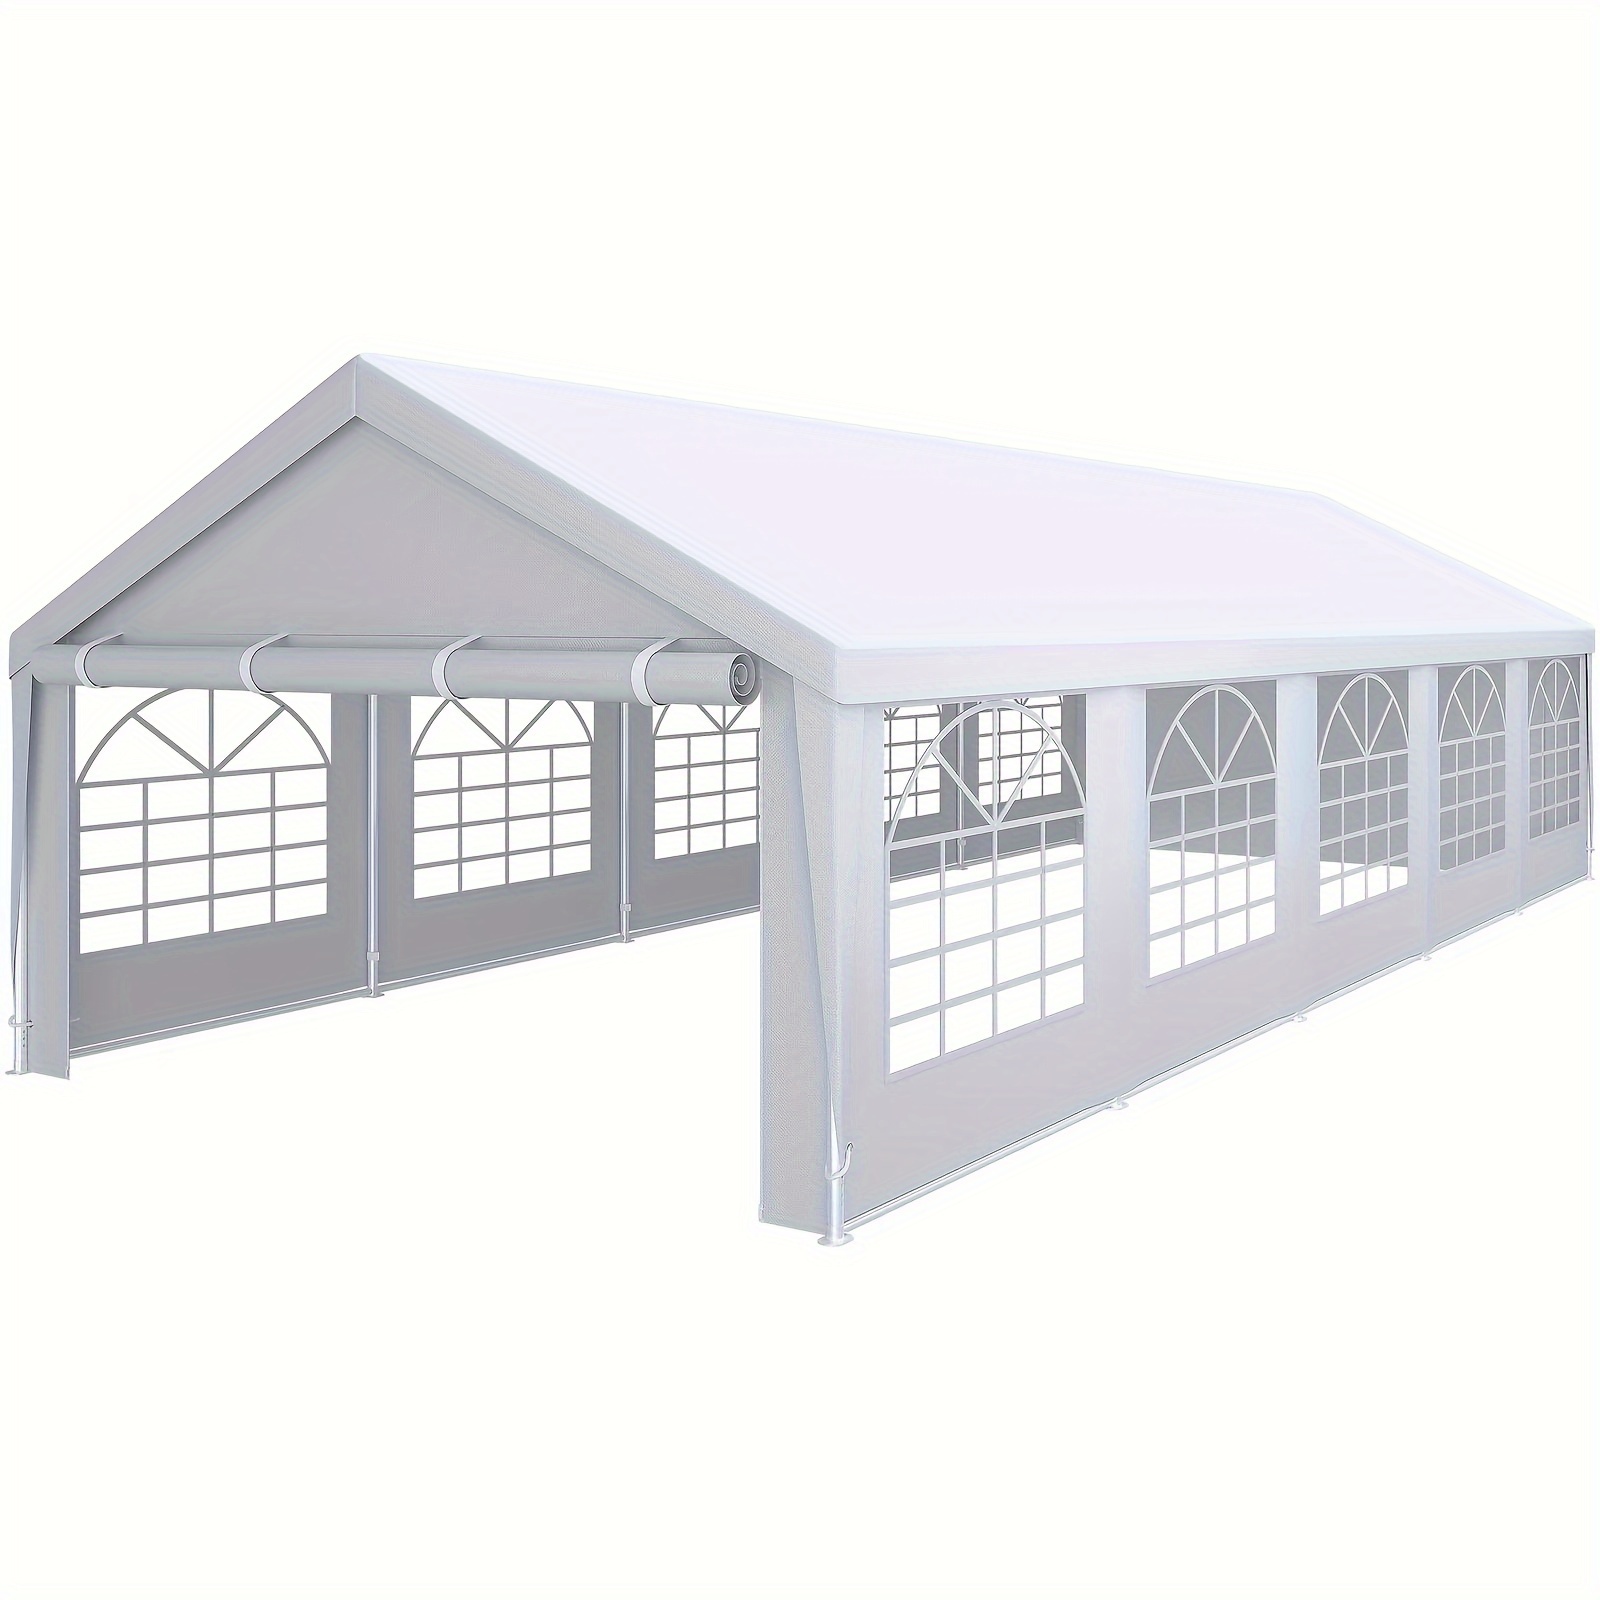 

Homiflex 16x32ft Party Tent Heavy Duty Wedding Tent Event Shelters Outdoor Canopy Upgraded Galvanized Steel Carport With Removable Sidewall Windows For Commercial And Parties (white)